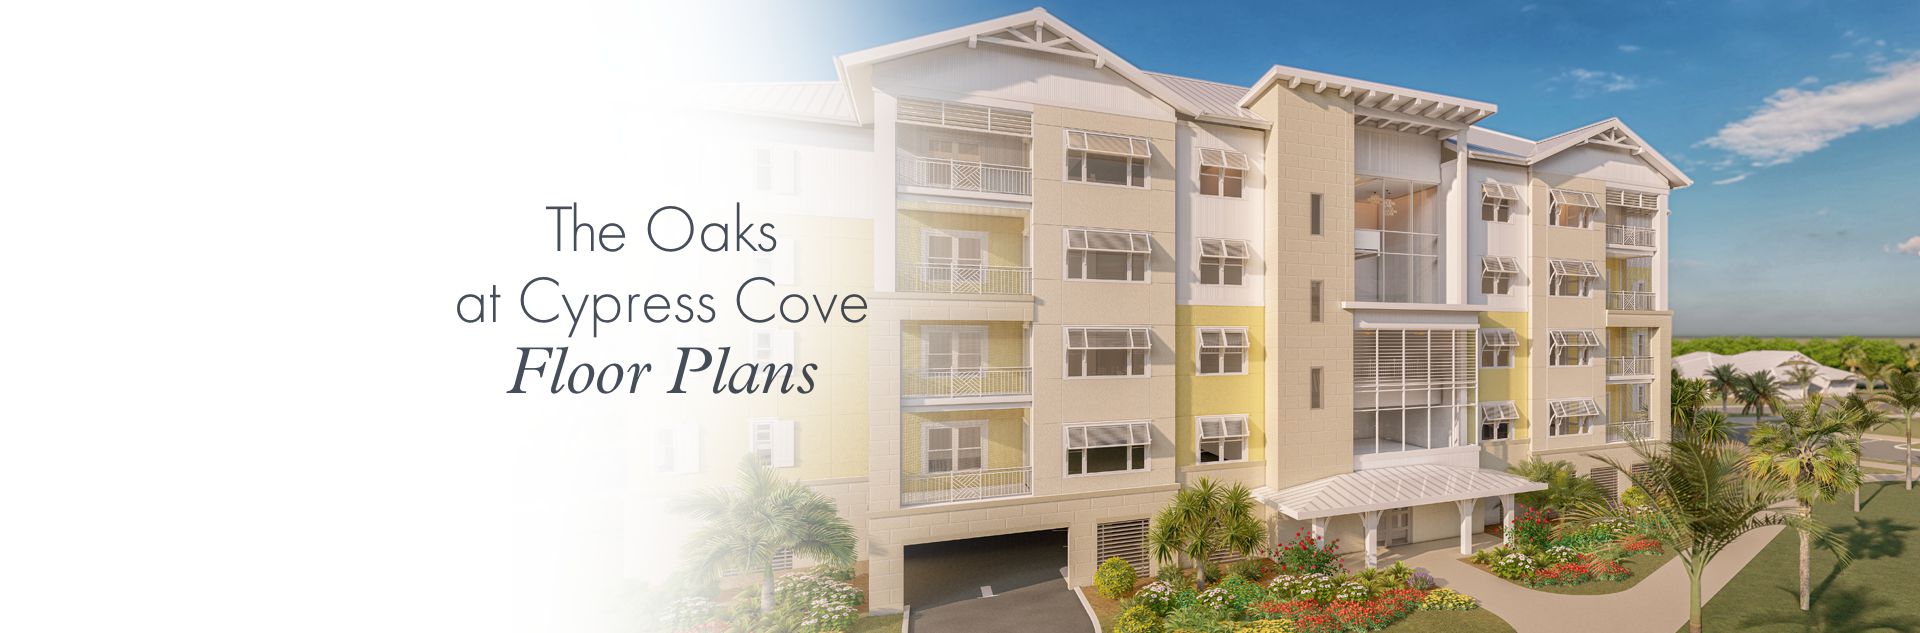 The Oaks at Cypress Cove Floor Plans